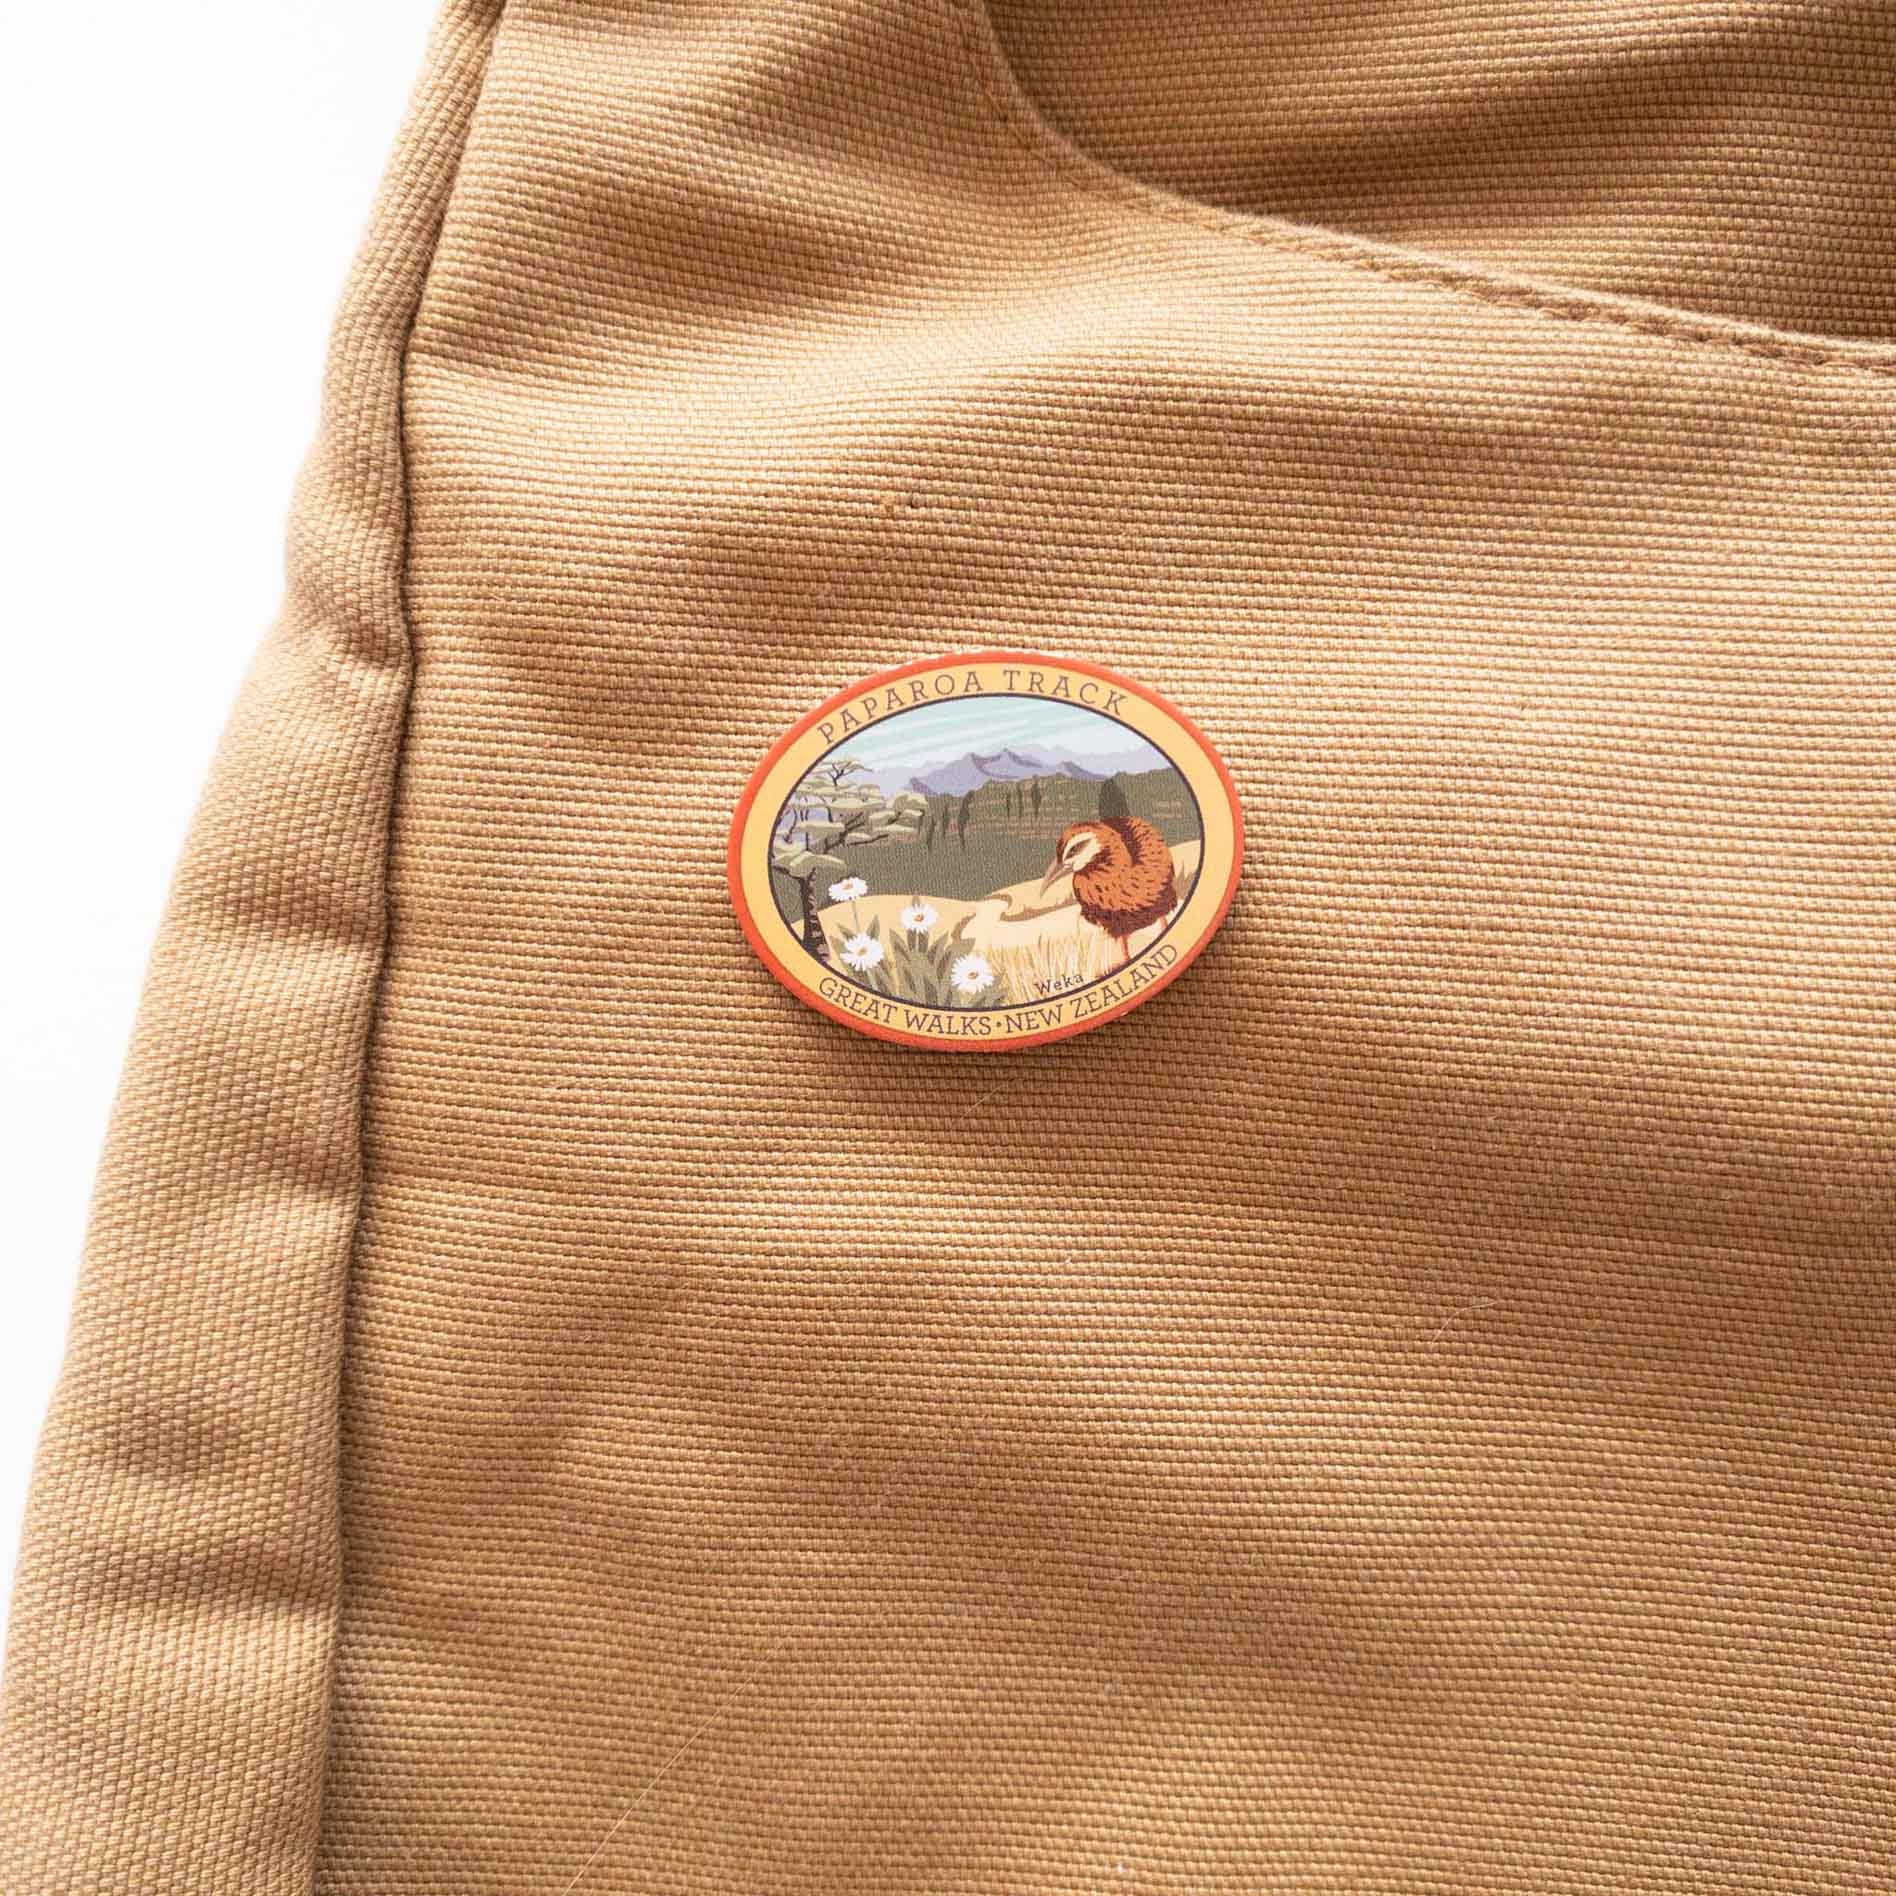 Oval Milford Track pin, with a whio/blue duck, blue peak and mountain buttercup, on a brown canvas bag.